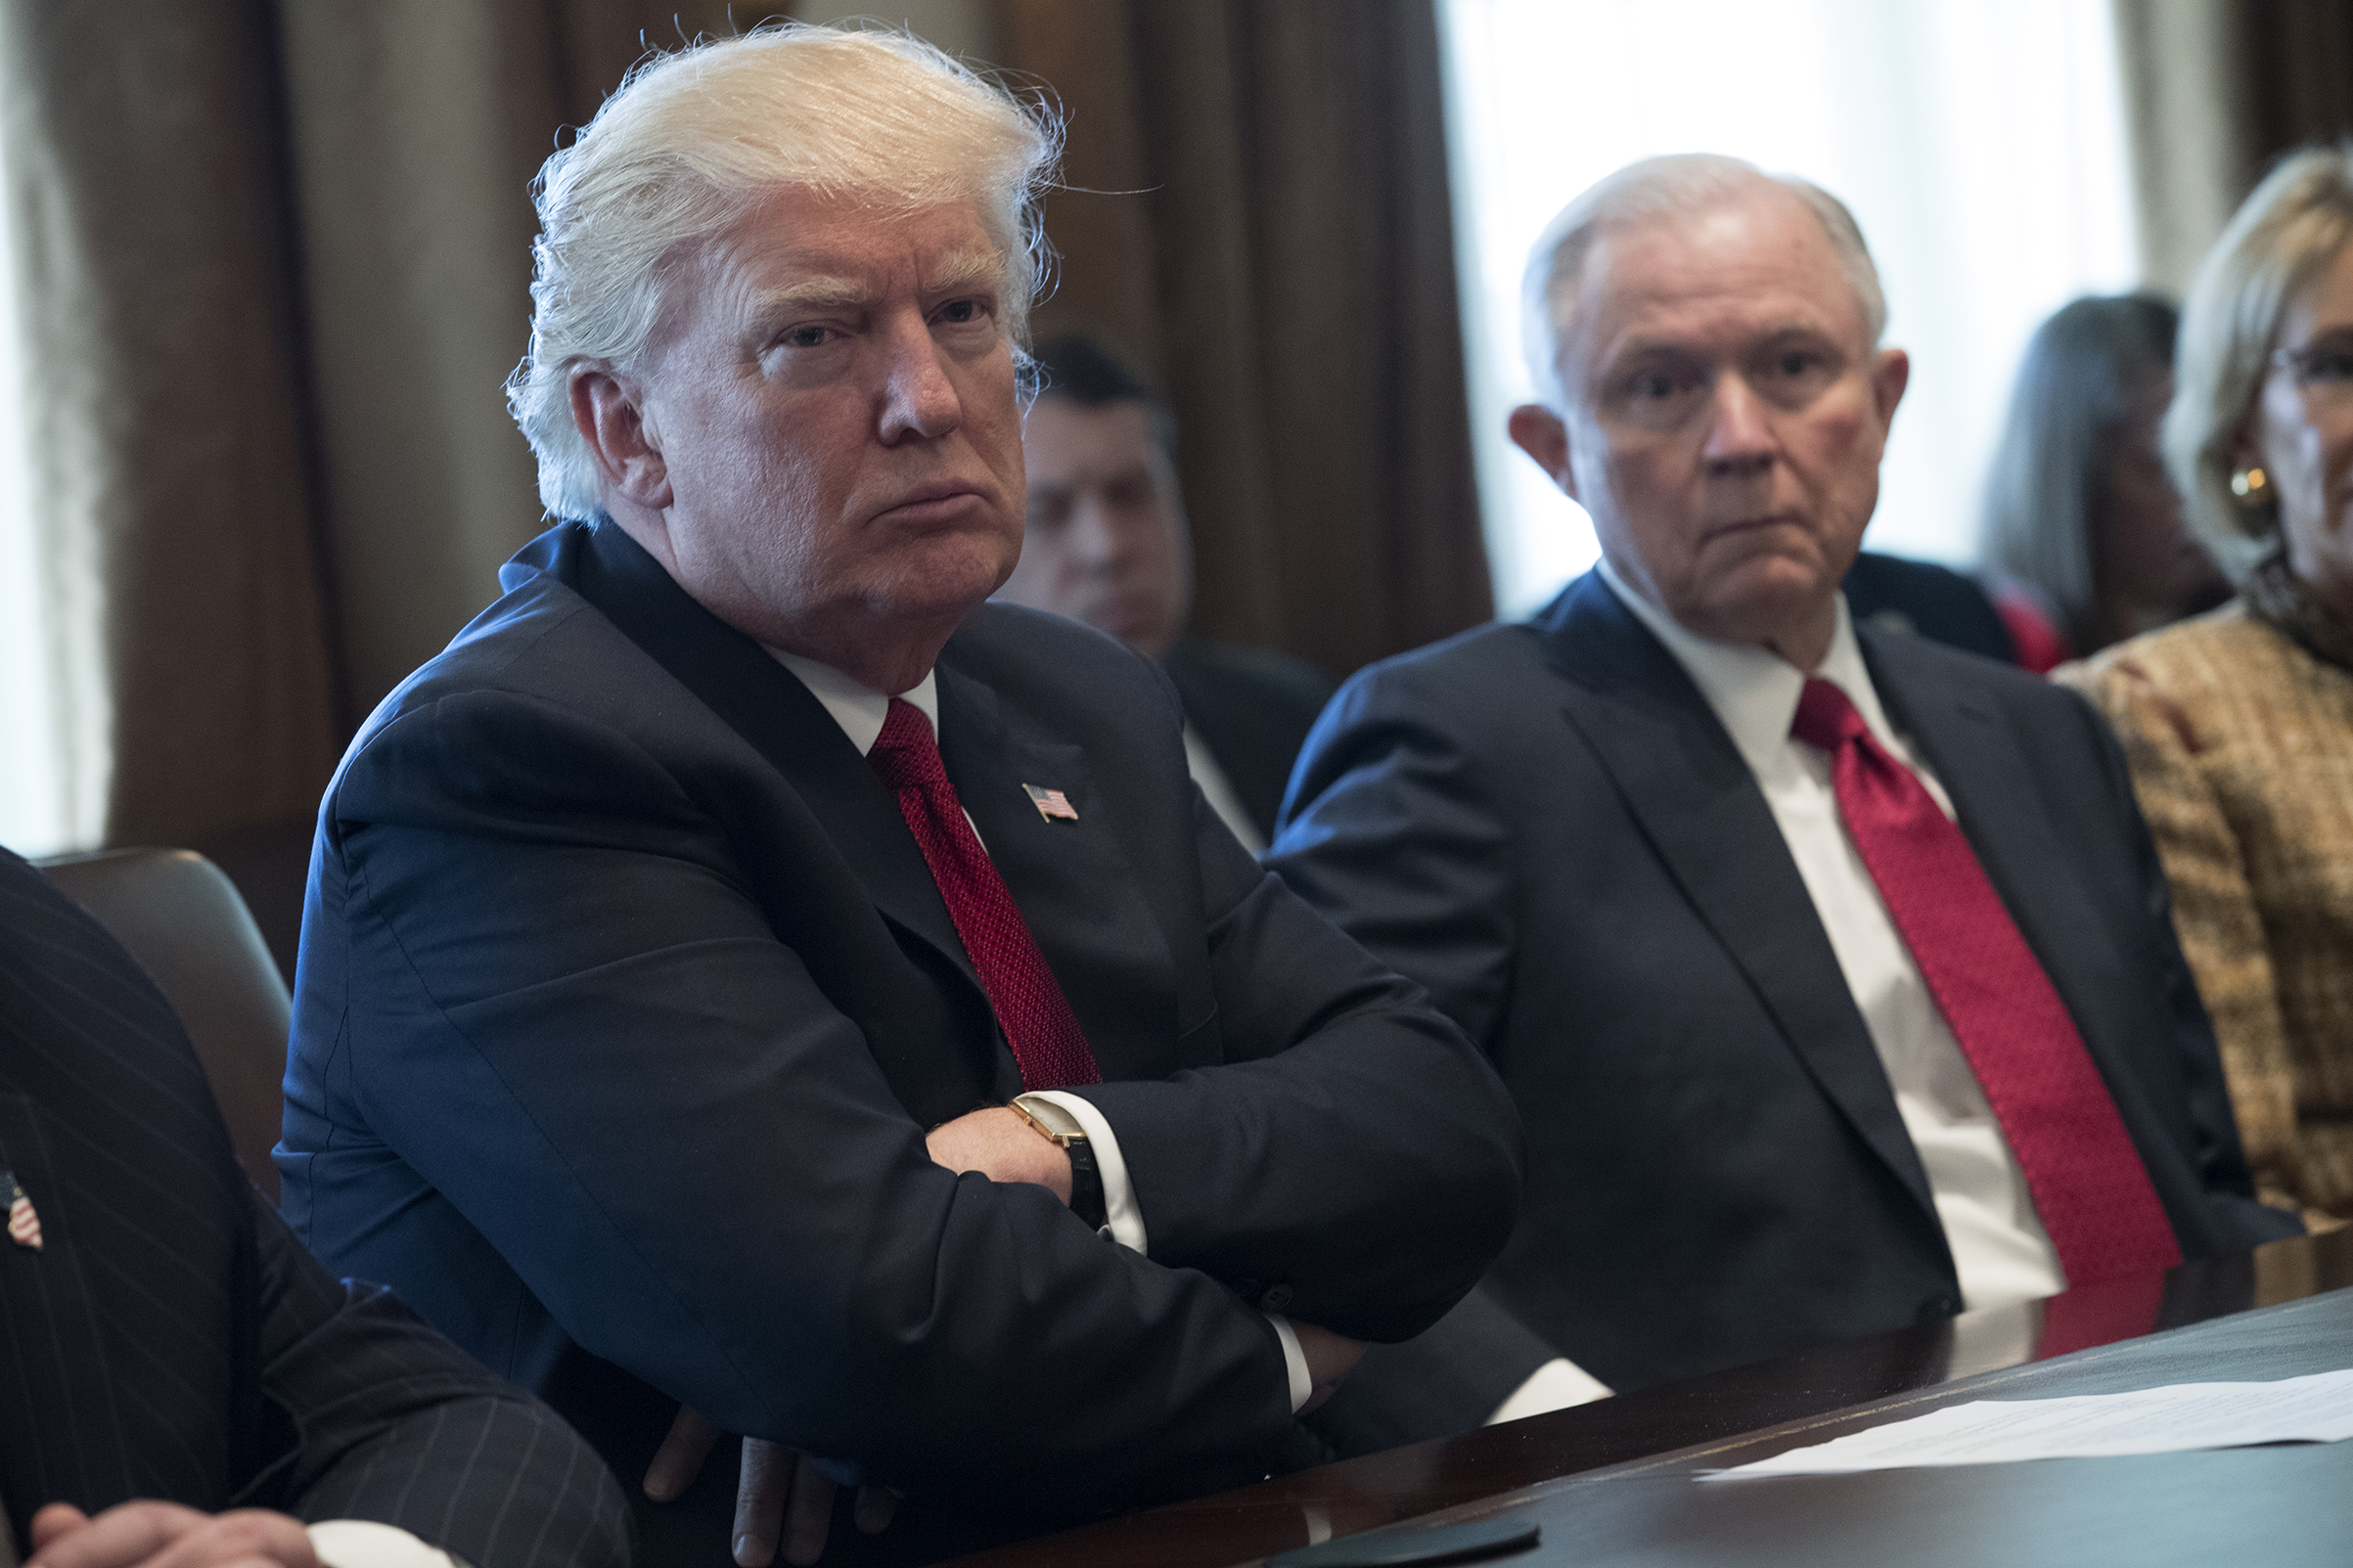 U.S. President Donald Trump (L) and Attorney General Jeff Sessions (R) attend a panel discussion on an opioid and drug abuse in the Roosevelt Room of the White House March 29, 2017 in Washington, DC. (Shawn Thew—Getty Images)